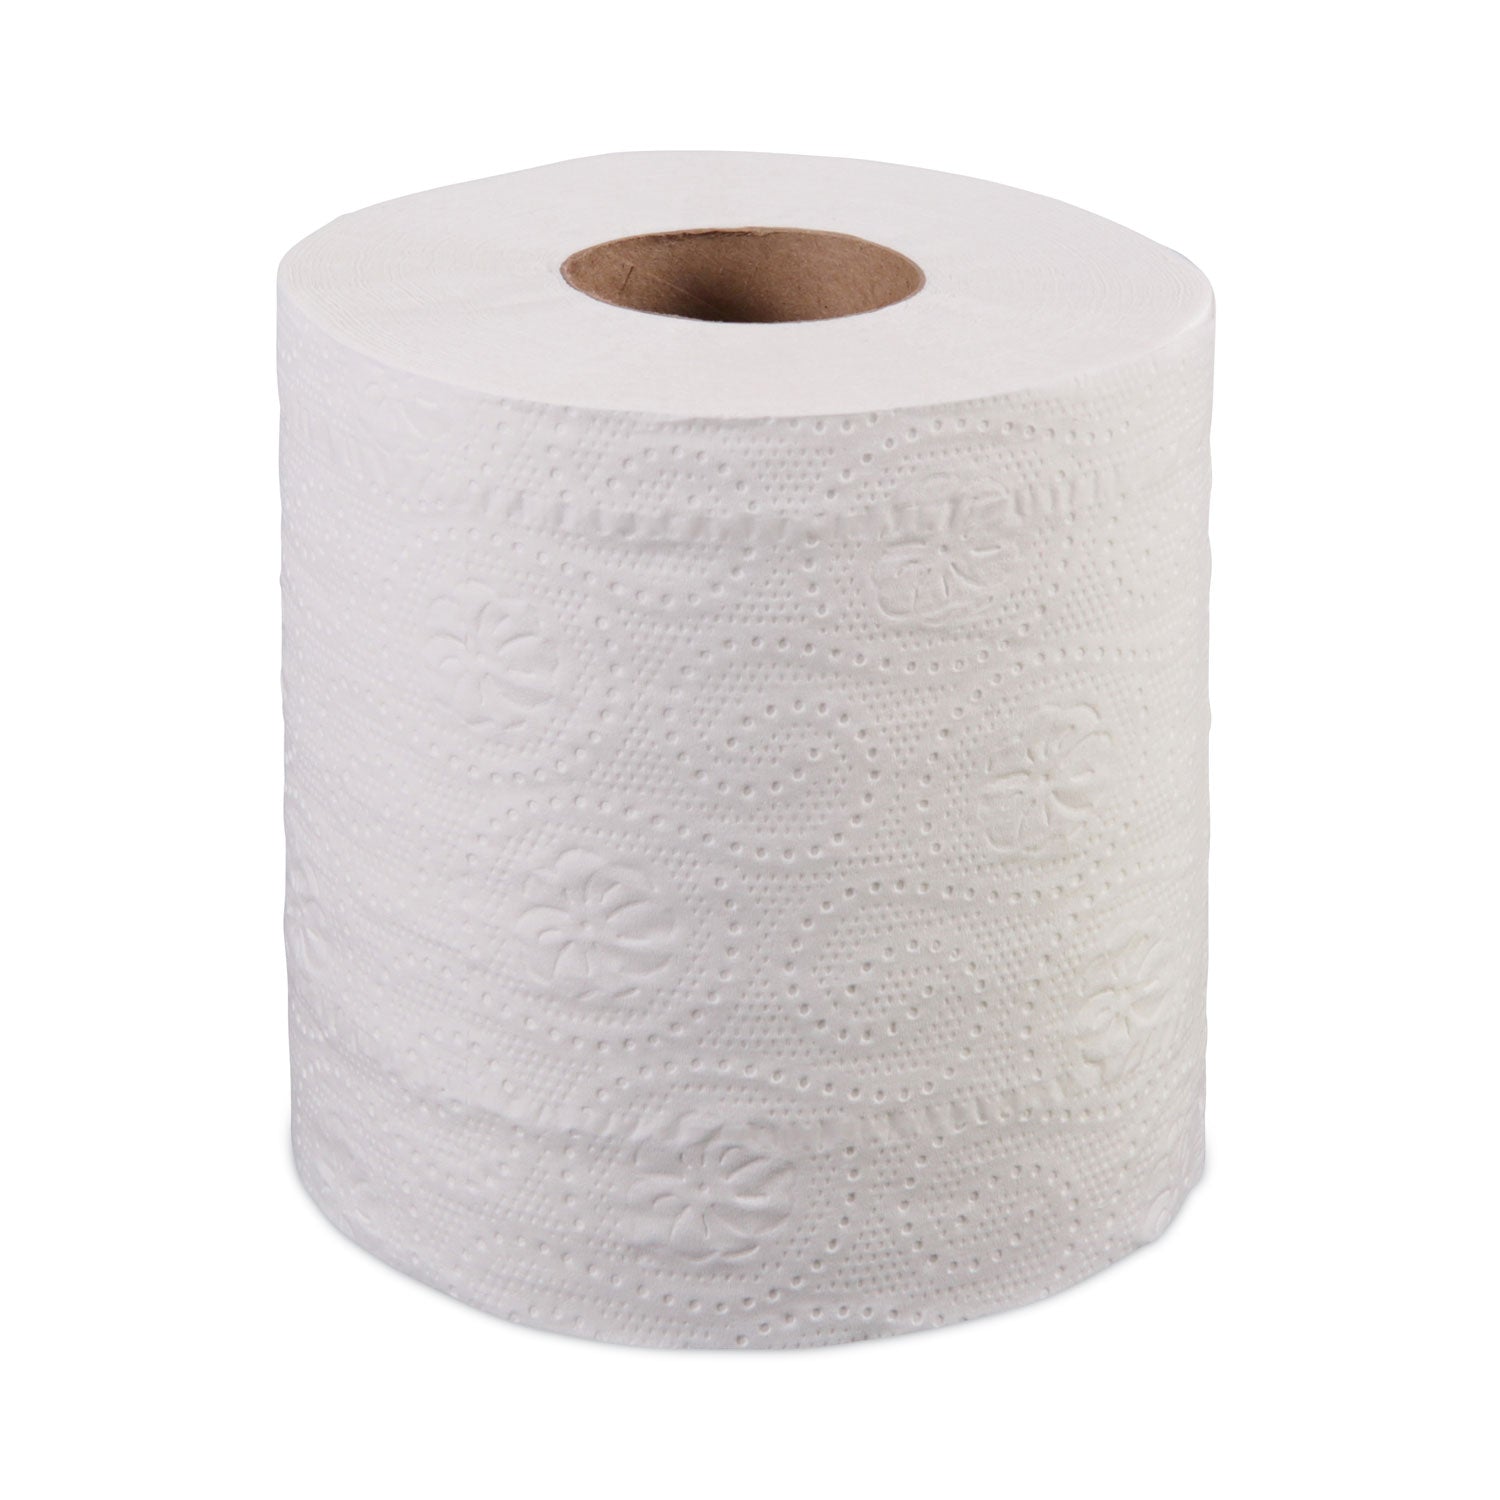 bath-tissue-septic-safe-individually-wrapped-rolls-2-ply-white-500-sheets-roll-96-rolls-carton_win2240b - 2